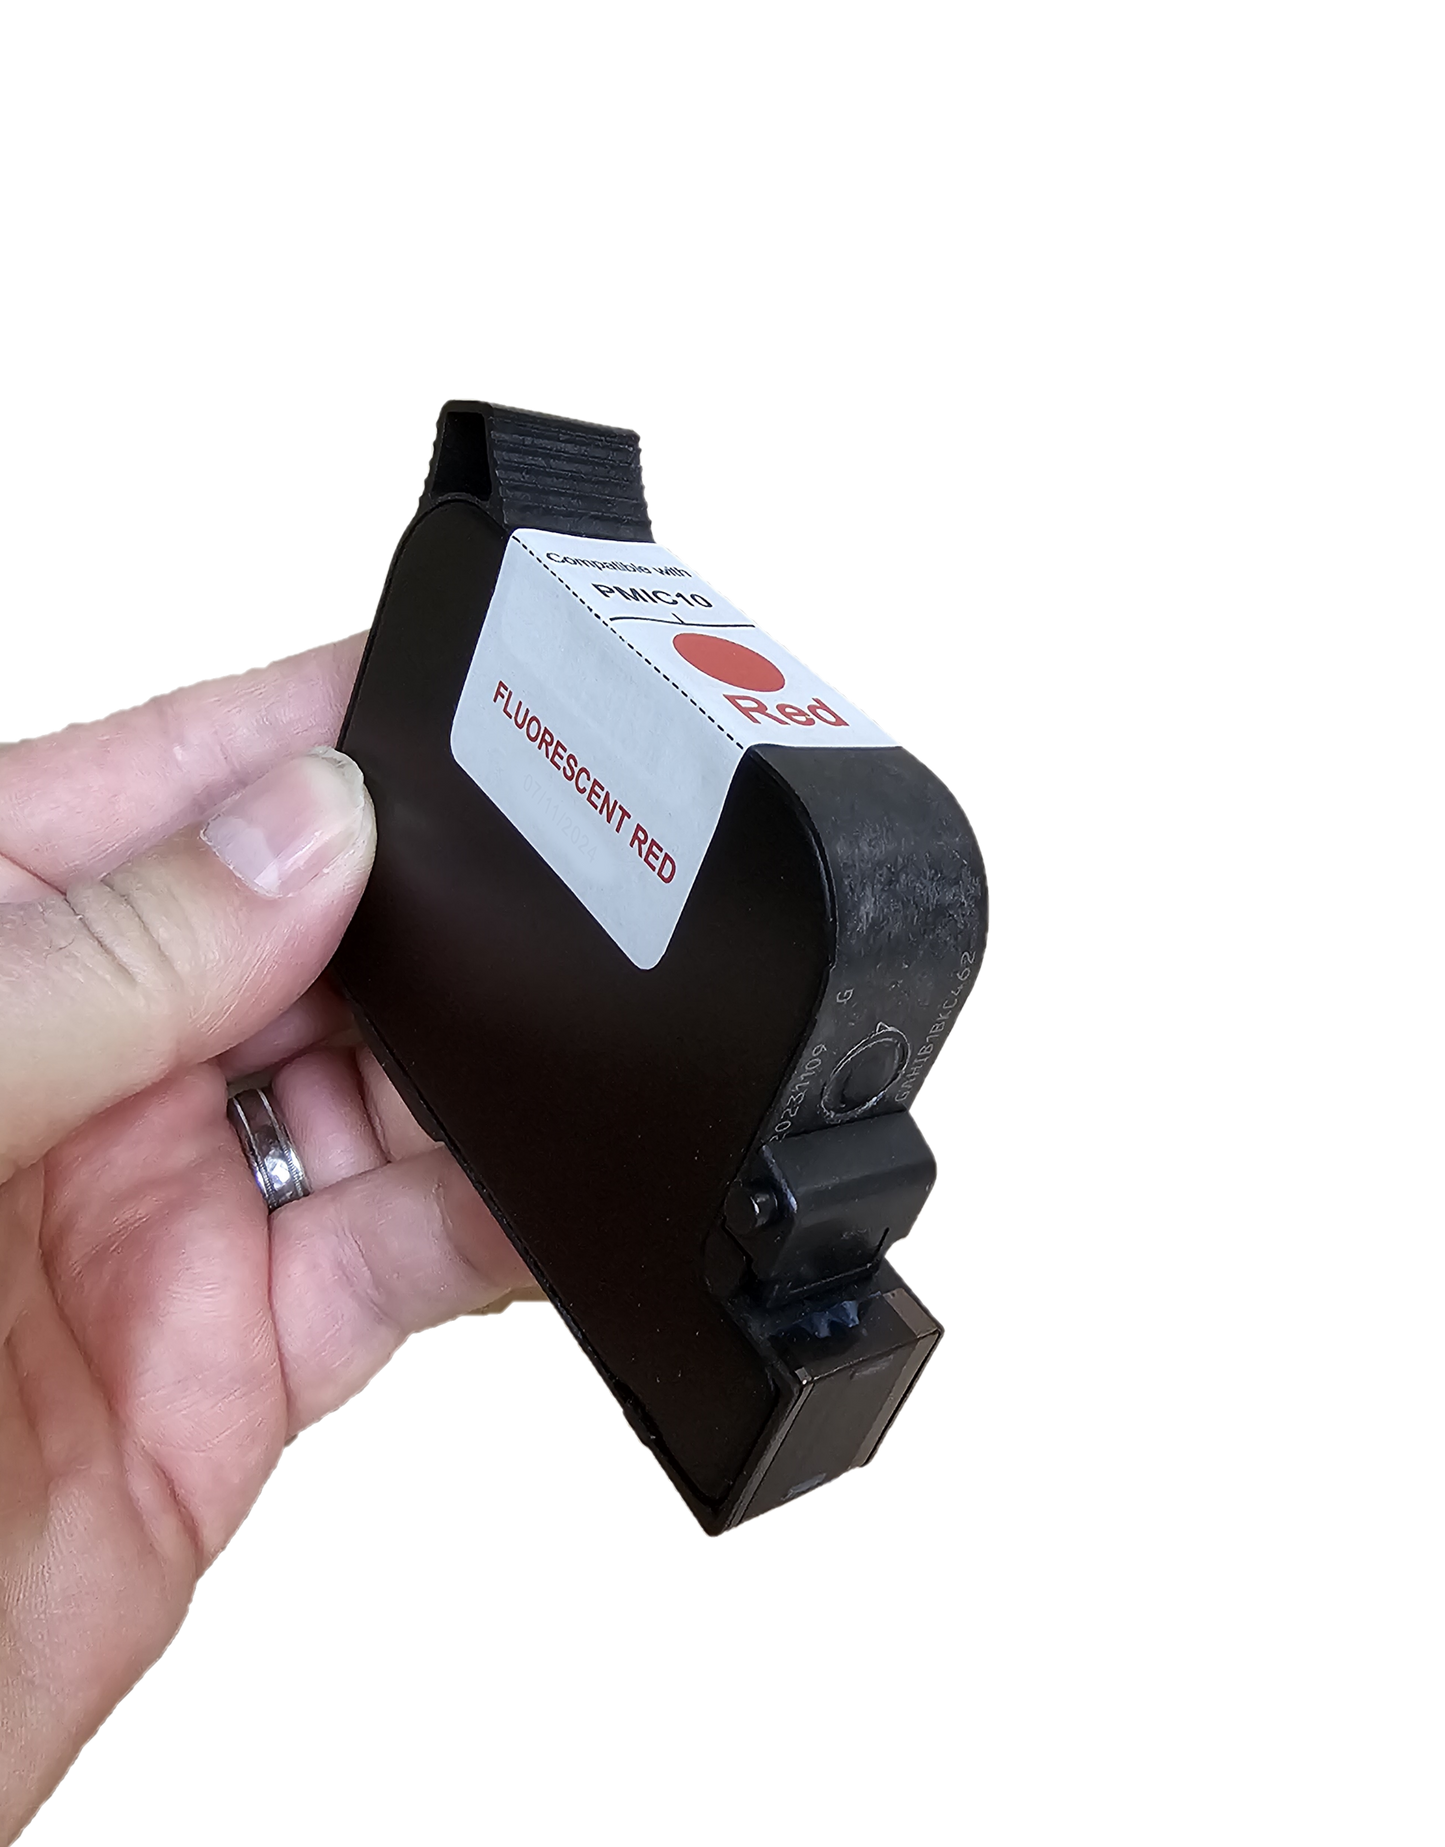 Discount Supply Company PMIC10 Francotyp Postalia FP Compatible Cartridge ~90 Day Warranty~ for Postbase Mini Machines Only